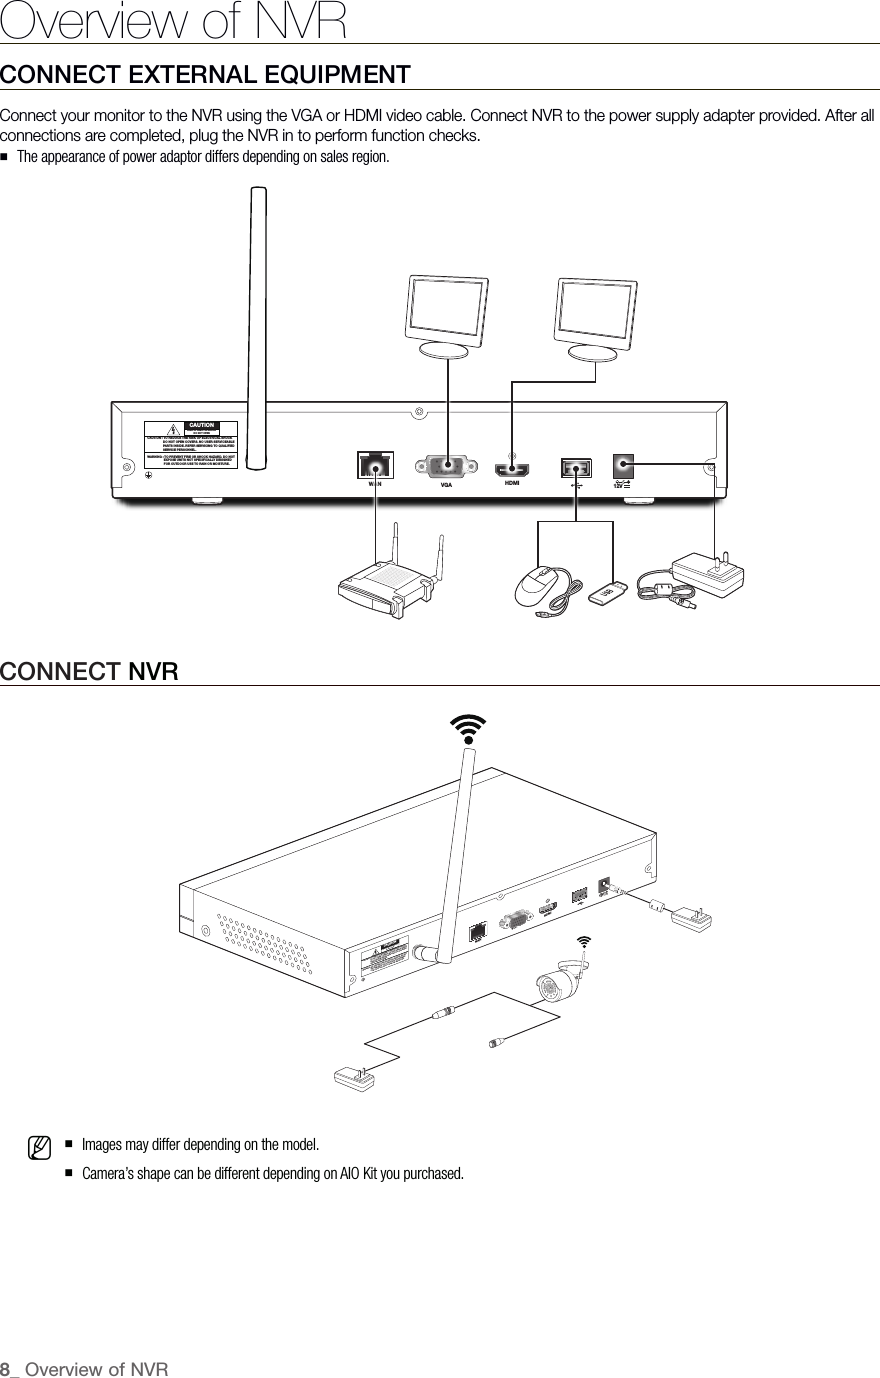 CONNECT EXTERNAL EQUIPMENTConnect your monitor to the NVR using the VGA or HDMI video cable. Connect NVR to the power supply adapter provided. After all connections are completed, plug the NVR in to perform function checks.  `The appearance of power adaptor differs depending on sales region.CONNECT NVR M  `Images may differ depending on the model. `Camera’s shape can be different depending on AIO Kit you purchased.Overview of NVR8_ Overview of NVRHDMIVGA 12VCAUTIONRISK OF ELECTRI SHOCKDO NOT OPENCAUTION : TO REDUCE THE RISK OF ELECTRICAL SHOCK                   DO NOT OPEN COVERS. NO USER SERVICEABLE                   PARTS INSIDE. REFER SERVICING TO QUALIFIED                   SERVICE PERSONNEL. WARNING : TO PREVENT FIRE OR SHOCK HAZARD. DO NOT                    EXPOSE UNITS NOT SPECIFICALLY DESIGNED                    FOR OUTDOOR USE TO RAIN OR MOISTURE.WANHDMIVGA 12VCAUTIONRISK OF ELECTRI SHOCKDO NOT OPENCAUTION : TO REDUCE THE RISK OF ELECTRICAL SHOCK                   DO NOT OPEN COVERS. NO USER SERVICEABLE                   PARTS INSIDE. REFER SERVICING TO QUALIFIED                   SERVICE PERSONNEL. WARNING : TO PREVENT FIRE OR SHOCK HAZARD. DO NOT                    EXPOSE UNITS NOT SPECIFICALLY DESIGNED                    FOR OUTDOOR USE TO RAIN OR MOISTURE.WAN